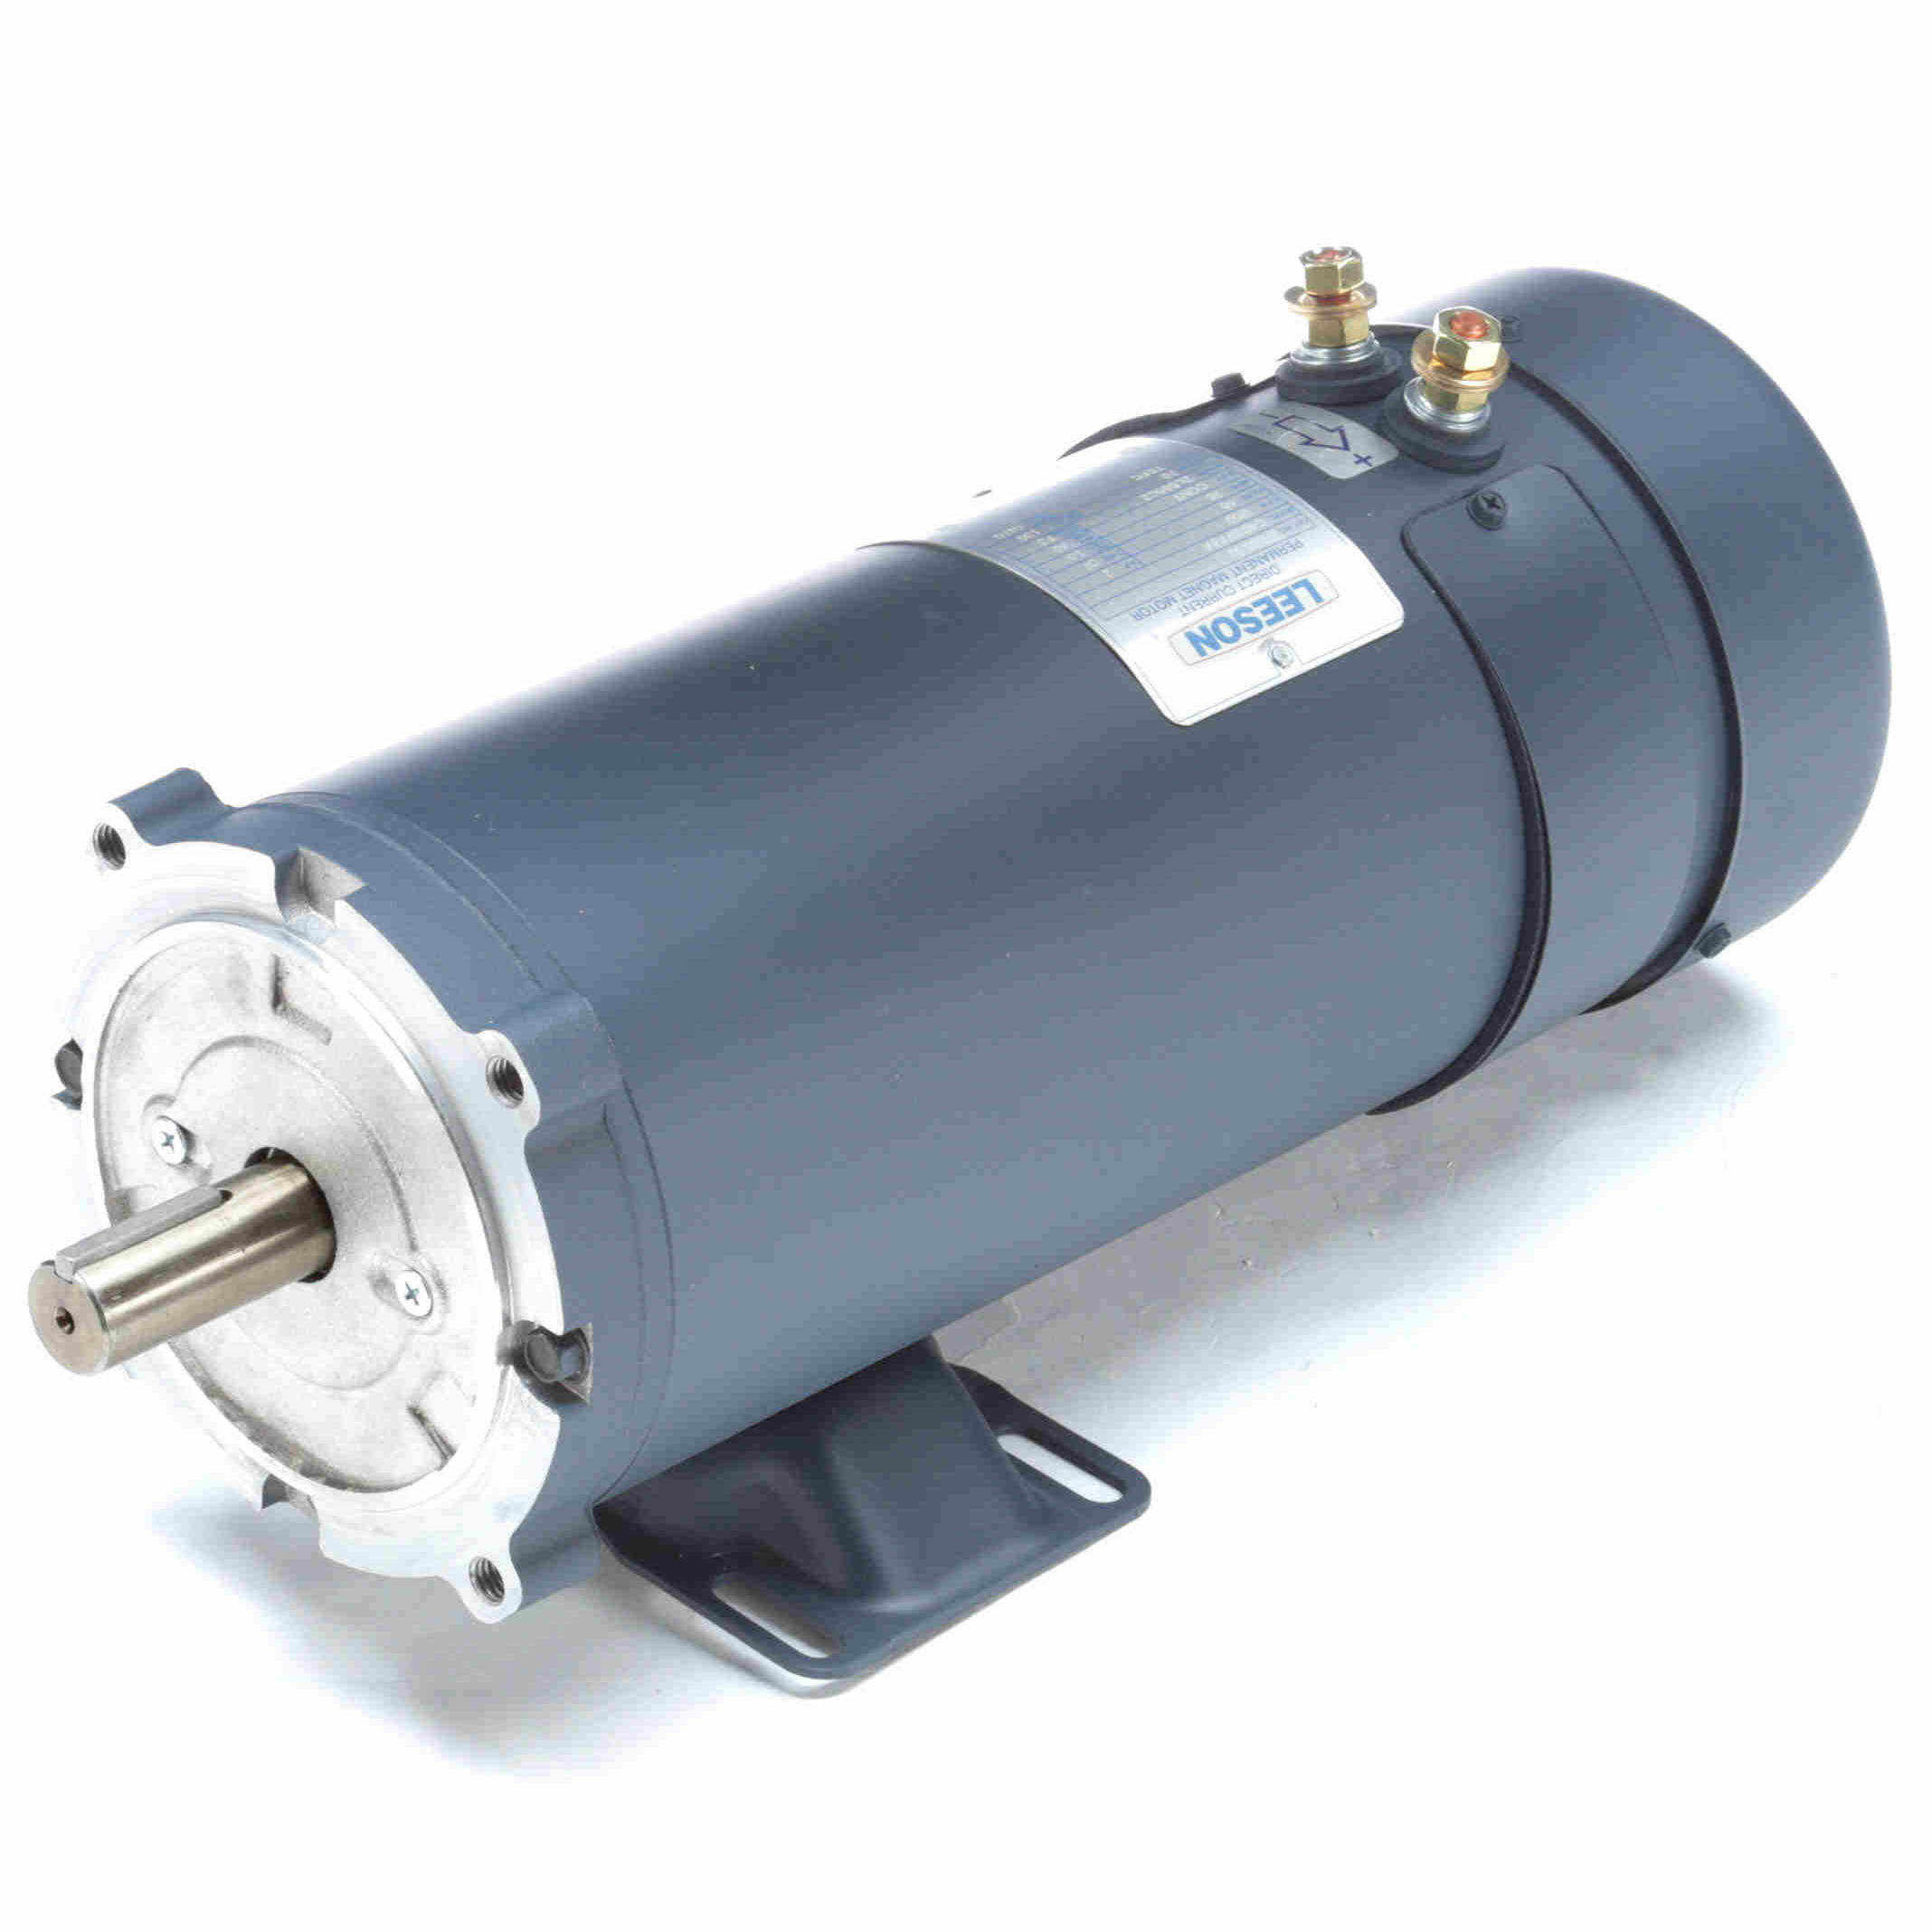 109108.00 Leeson 2HP Low Voltage DC Electric Motor, 1800RPM 2